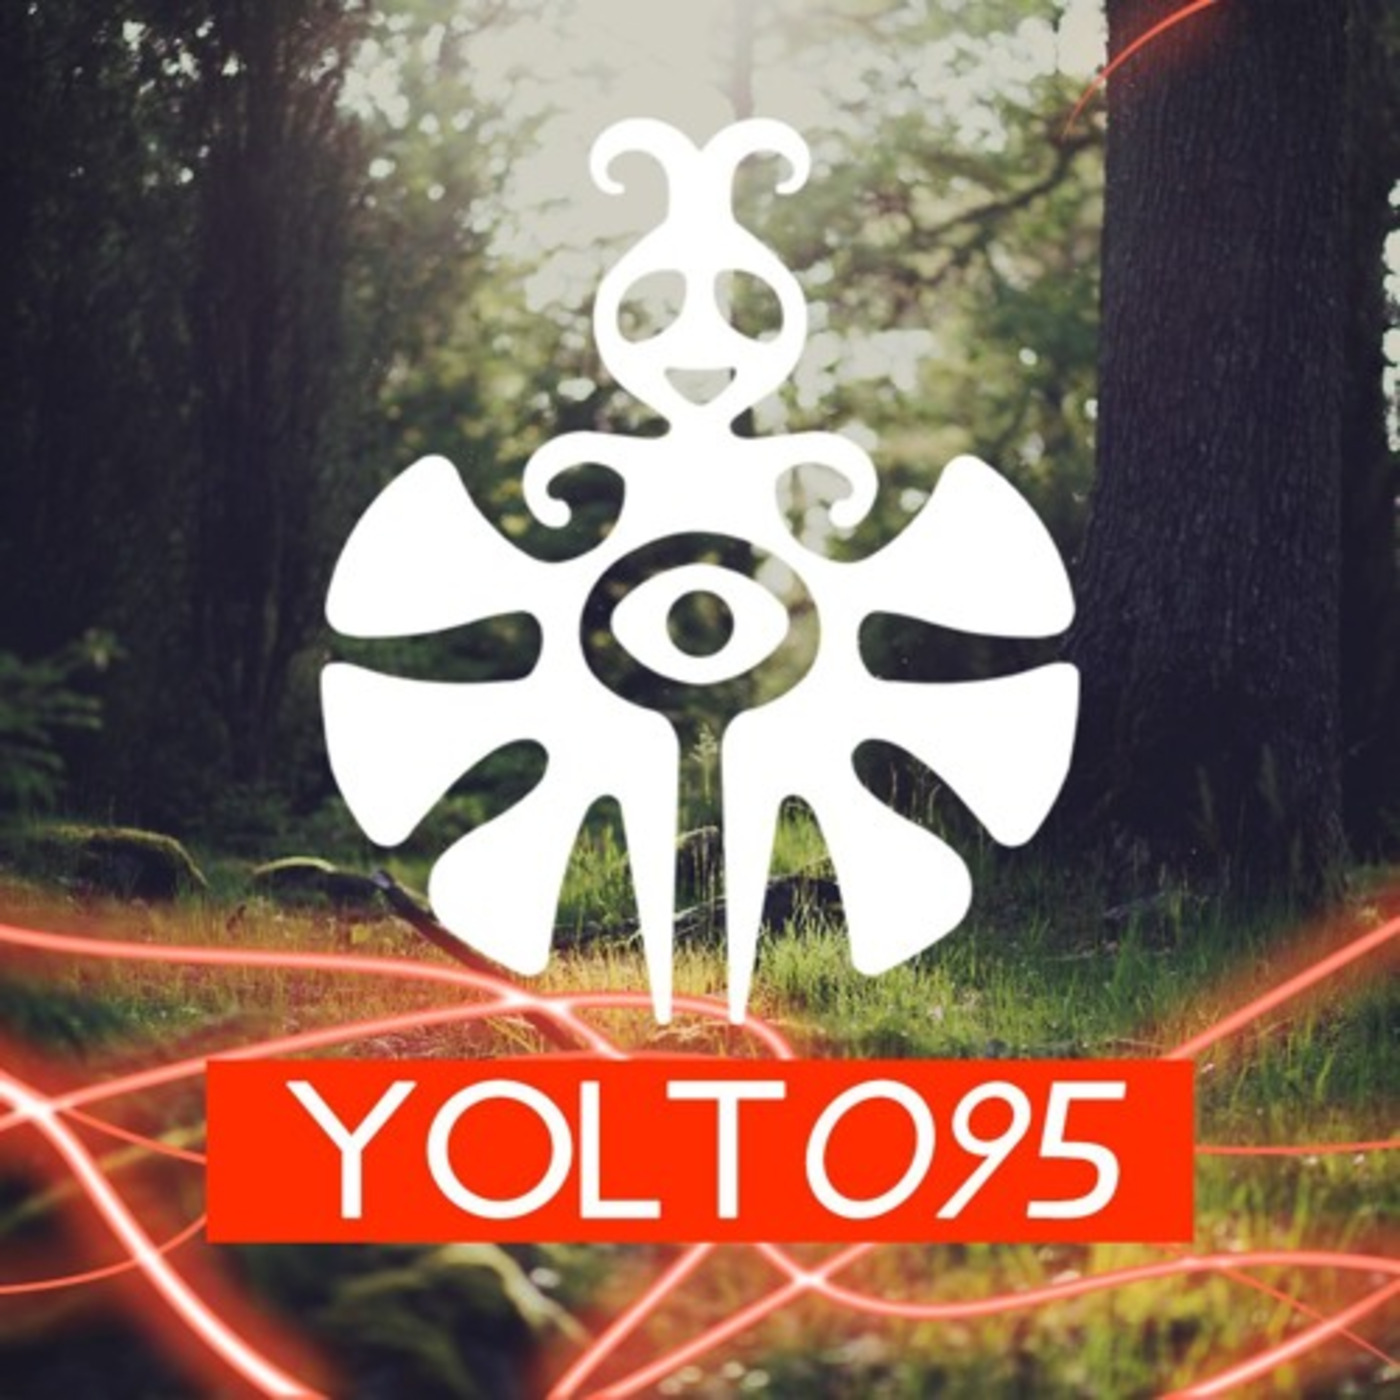 You Only Live Trance Episode 095 (#YOLT095) - Ness